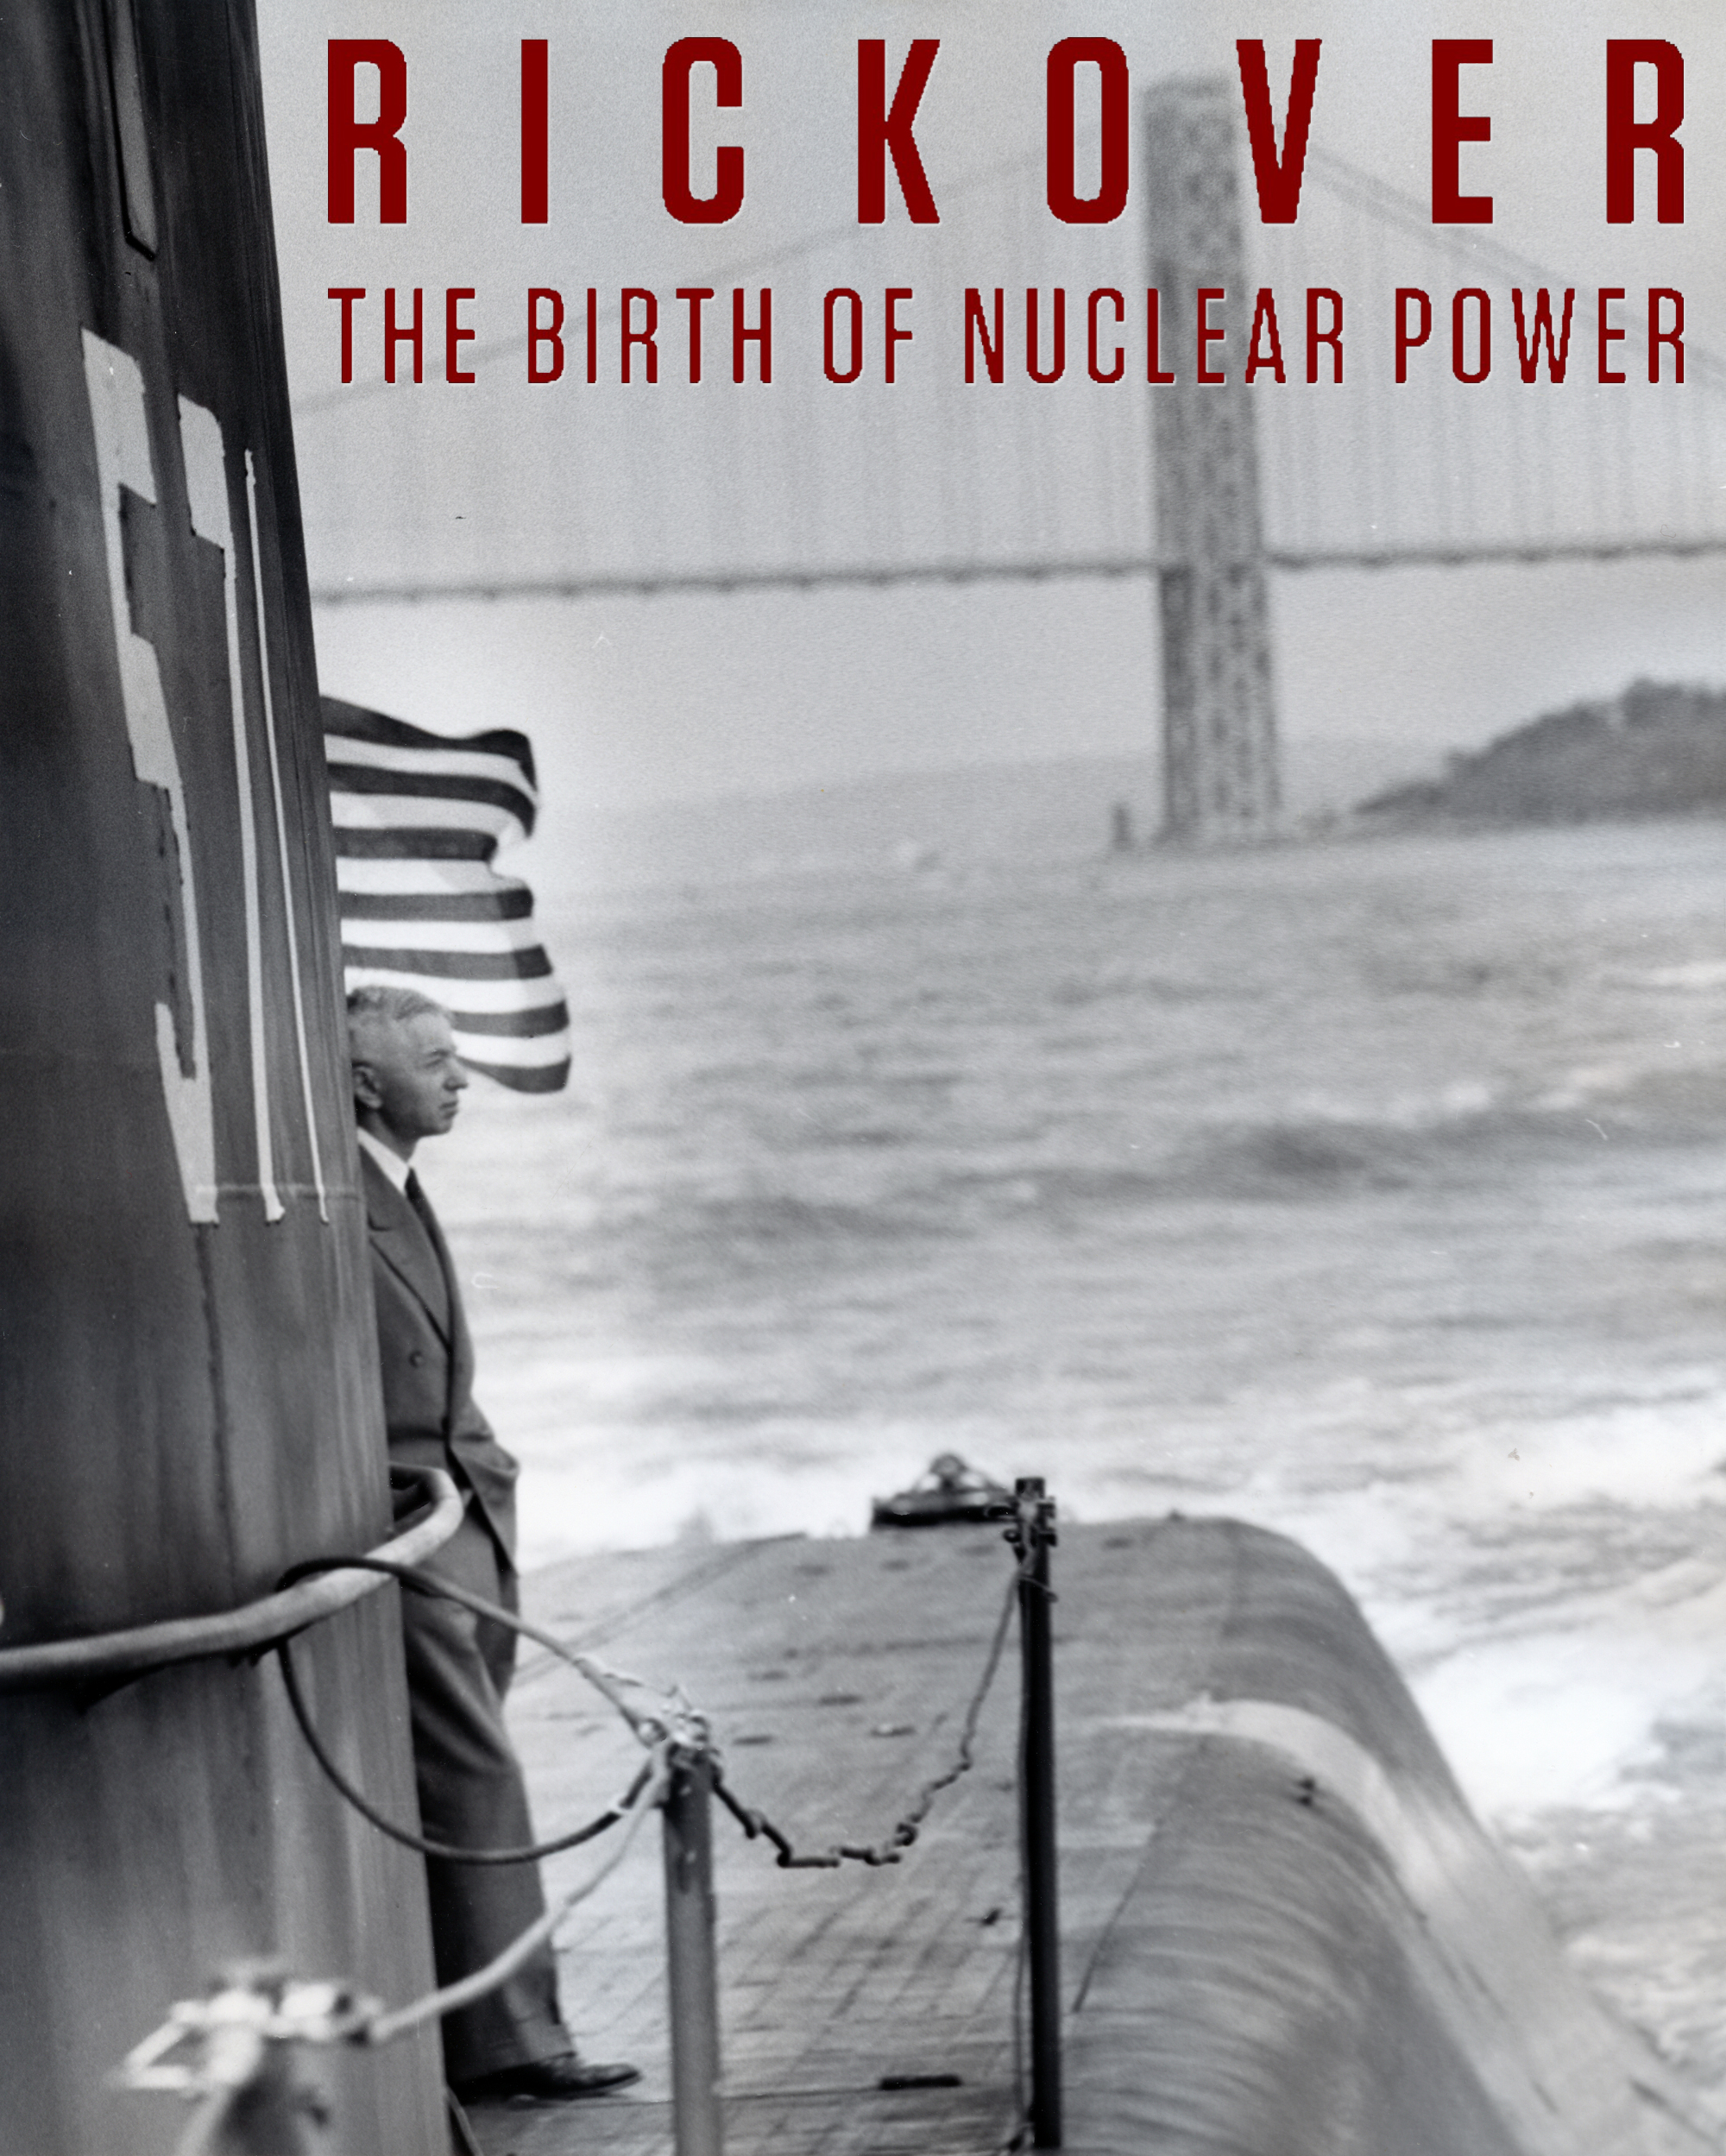 Rickover: The Birth of Nuclear Power - Where to Watch and Stream - TV Guide